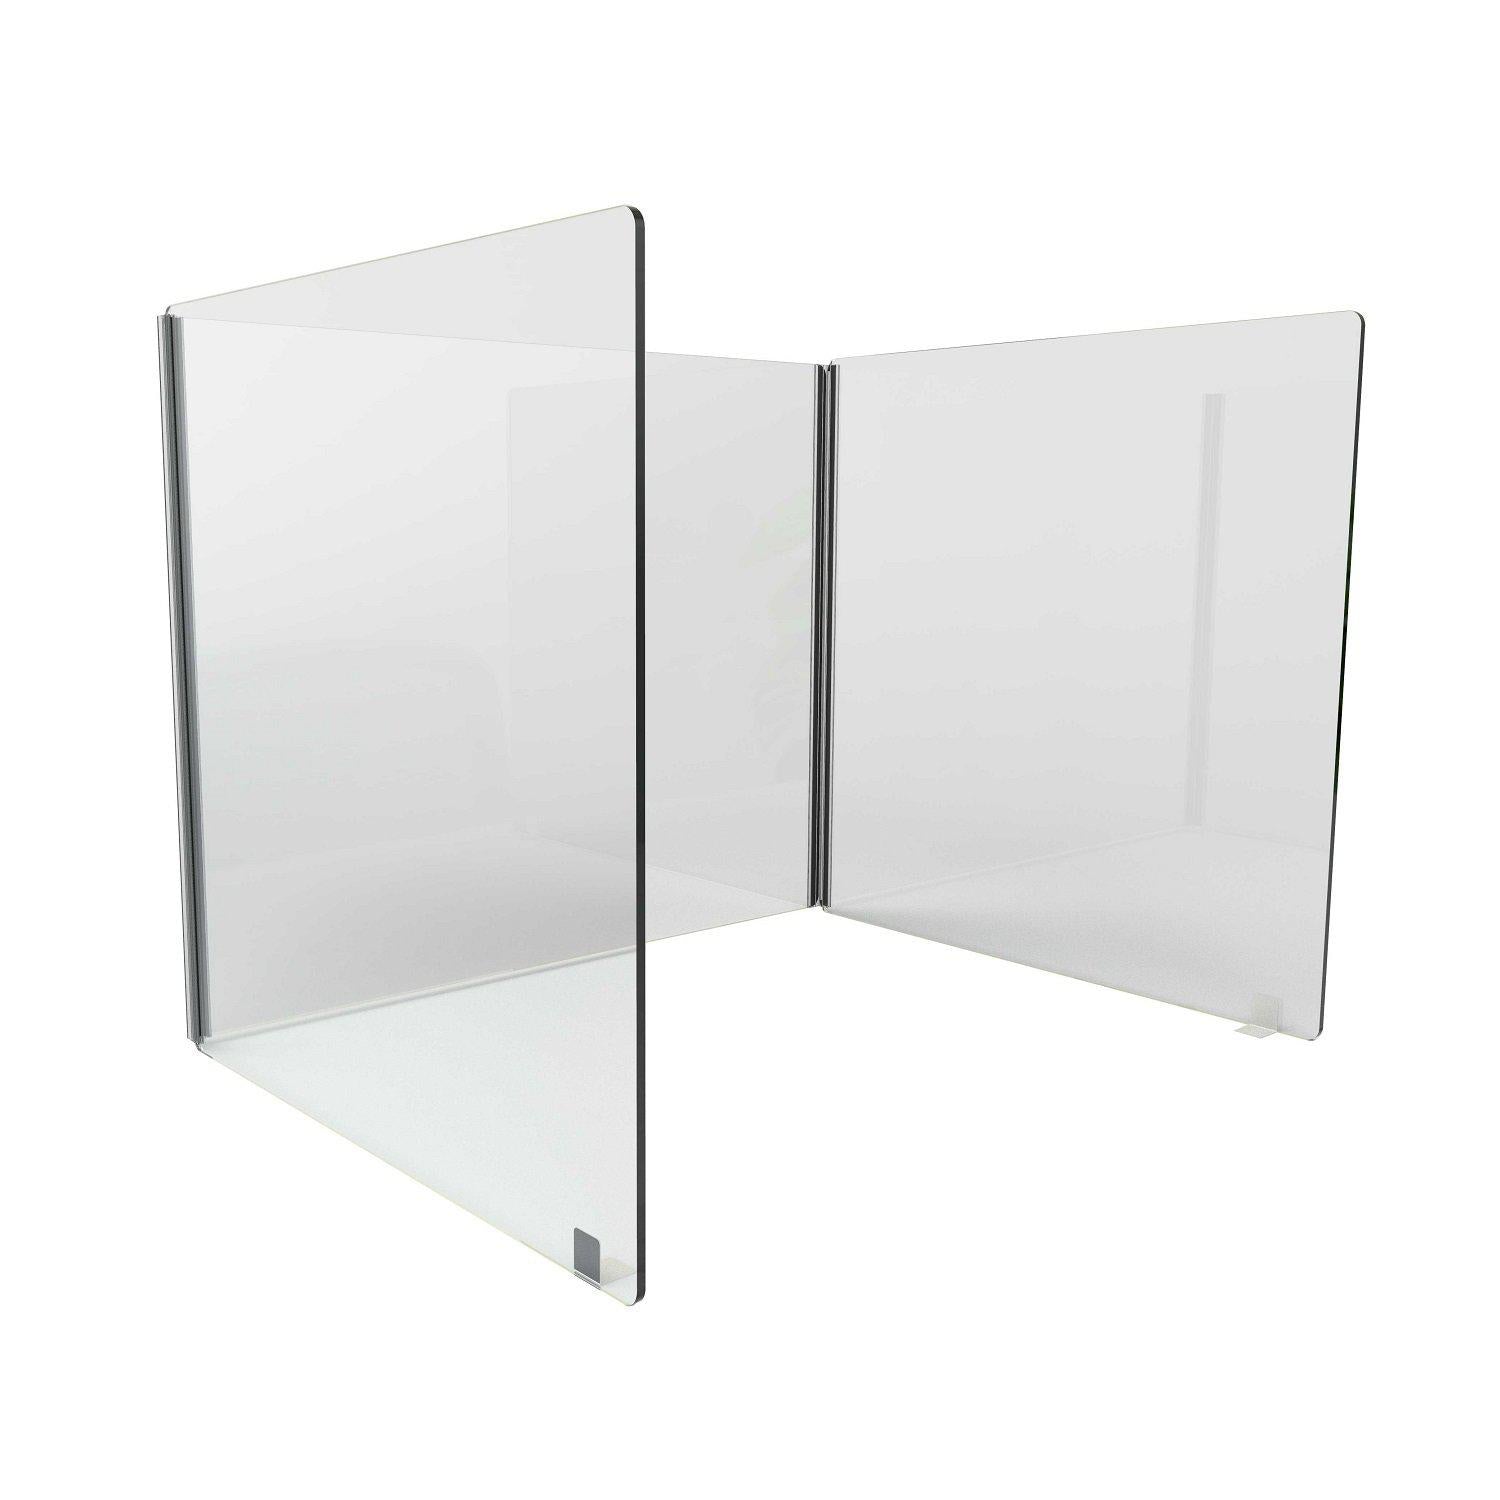 3-Sided Clear Thermoplastic Desktop Protection Screen/Sneeze Guard, 24”H x 24”W x 24”D